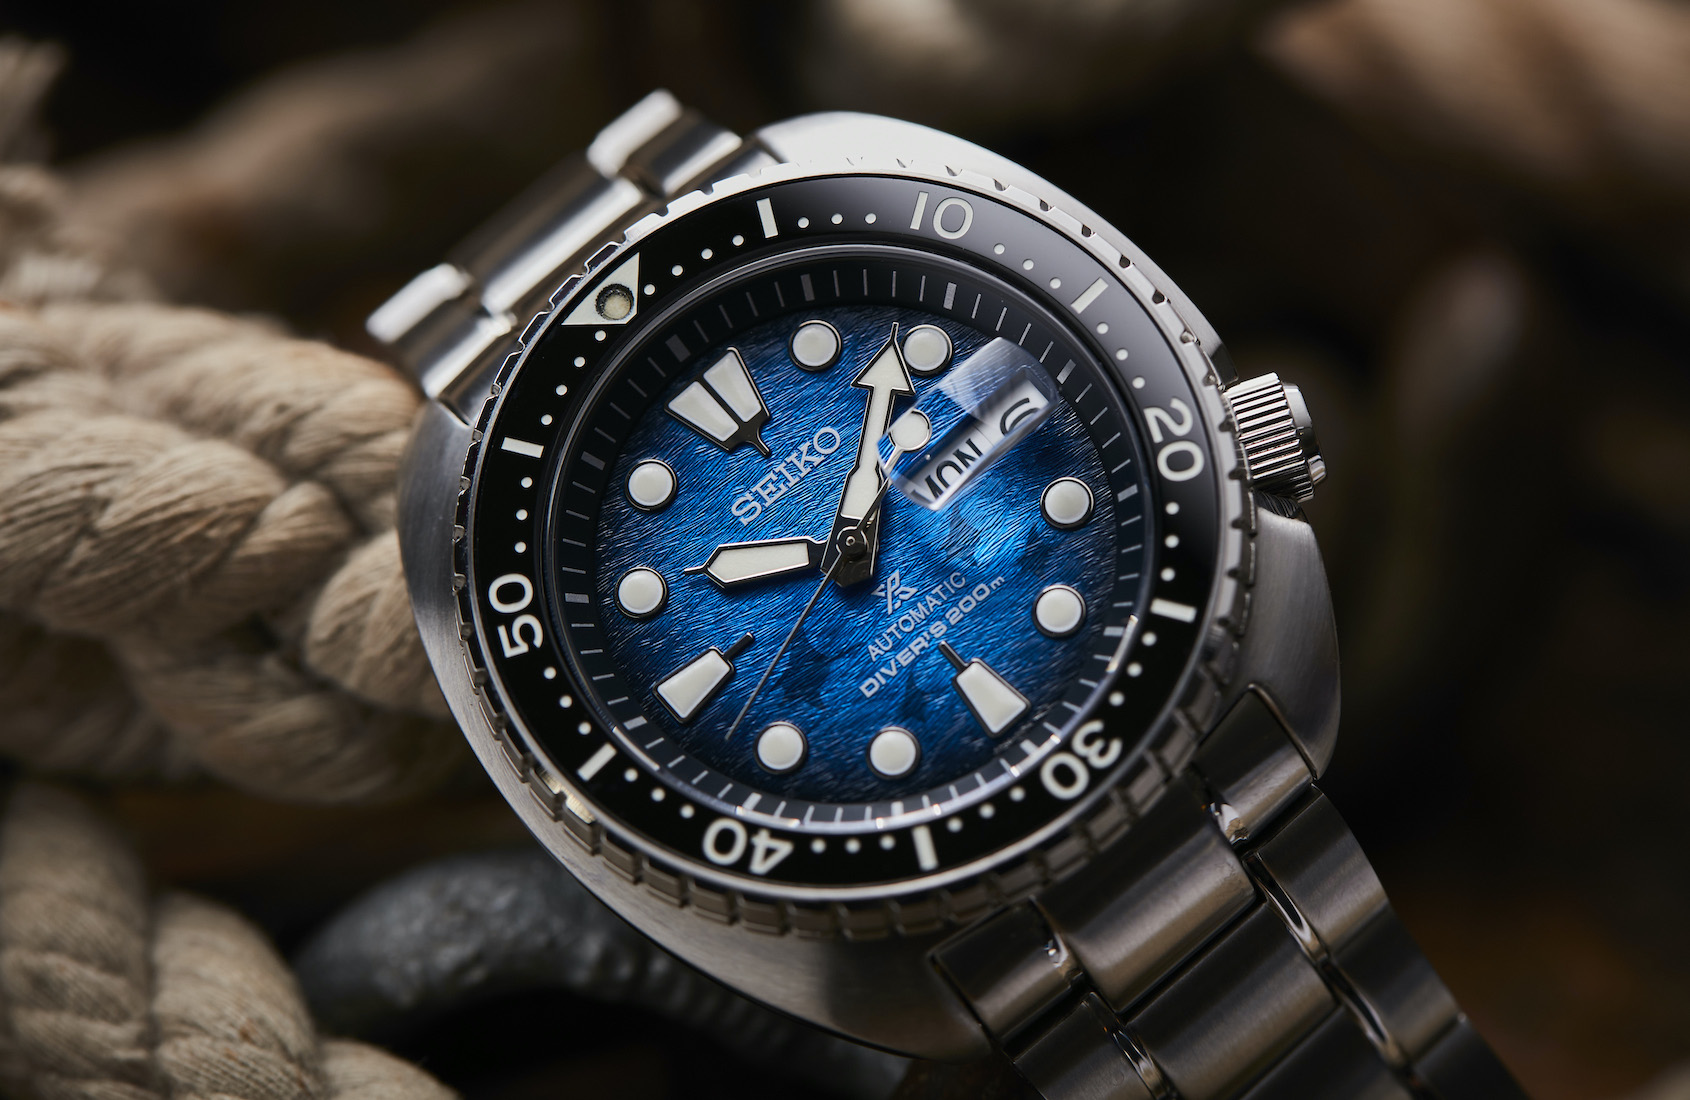 Bedrag forkorte Knogle INTRODUCING: These incredible photos of the Seiko SRPE39K Save The Ocean  say it all - Time and Tide Watches